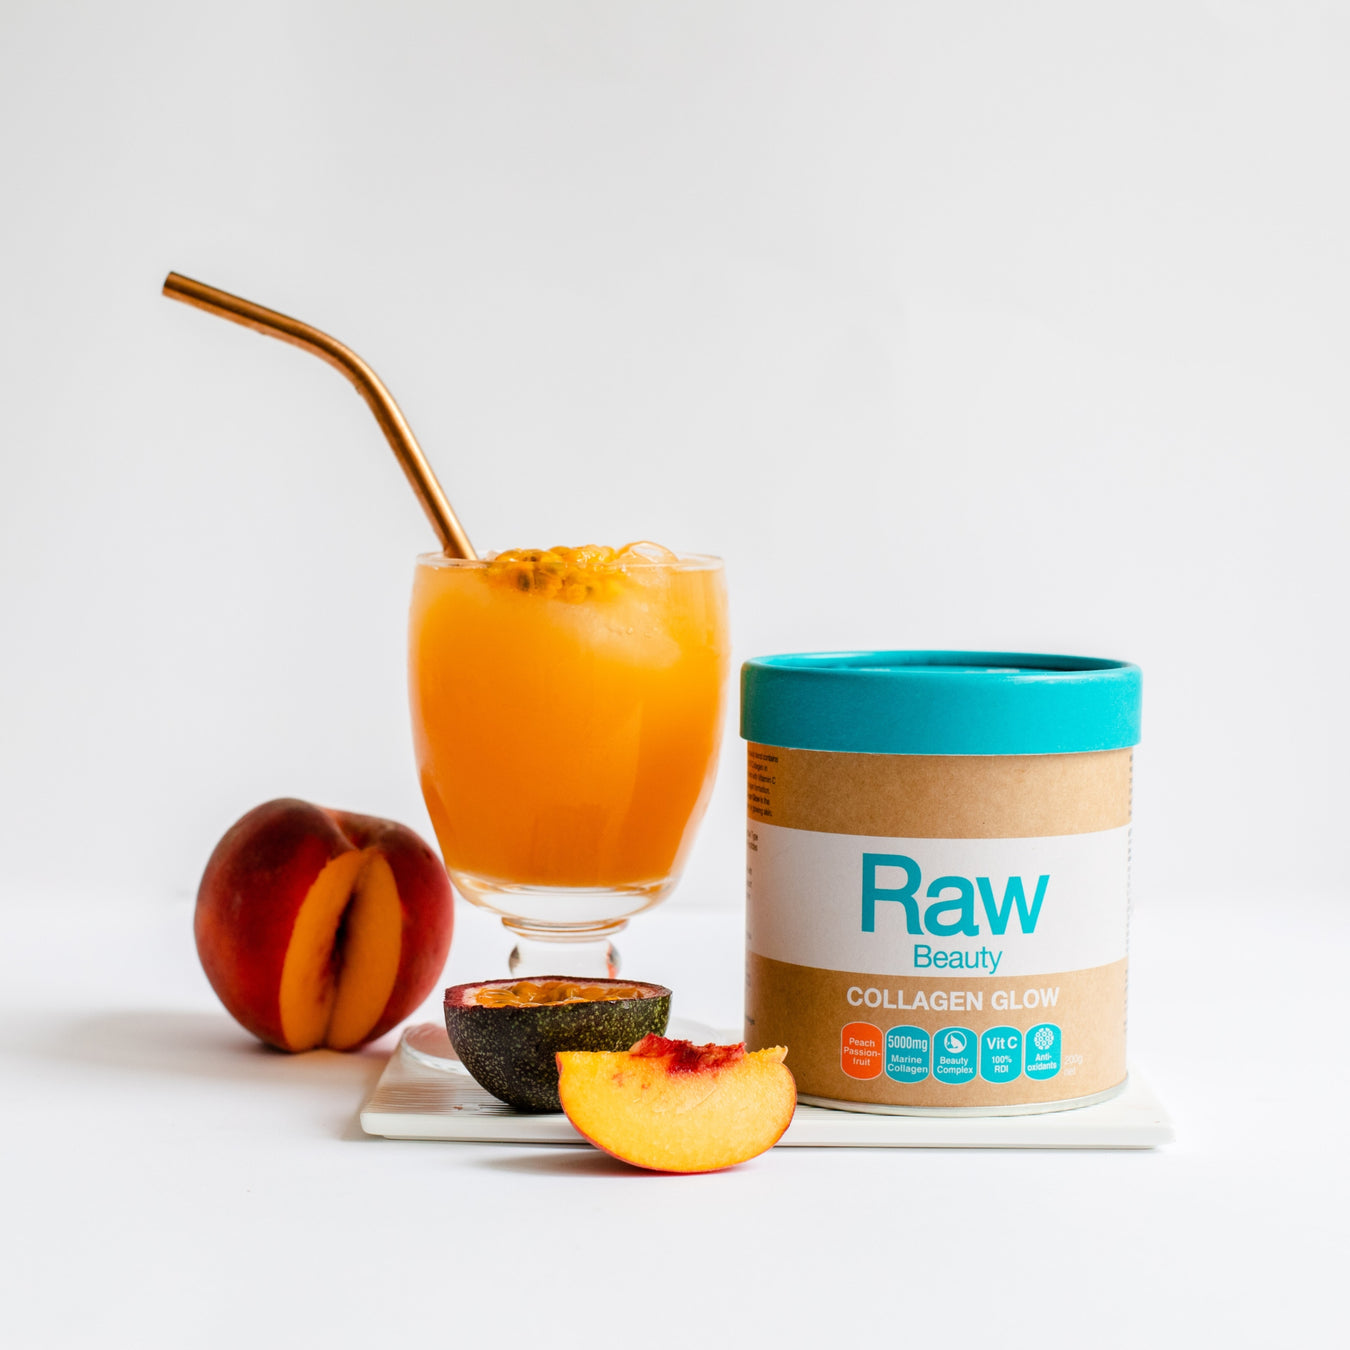 Amazonia Raw Beauty Collagen Glow 200g, Peach Passionfruit Flavour